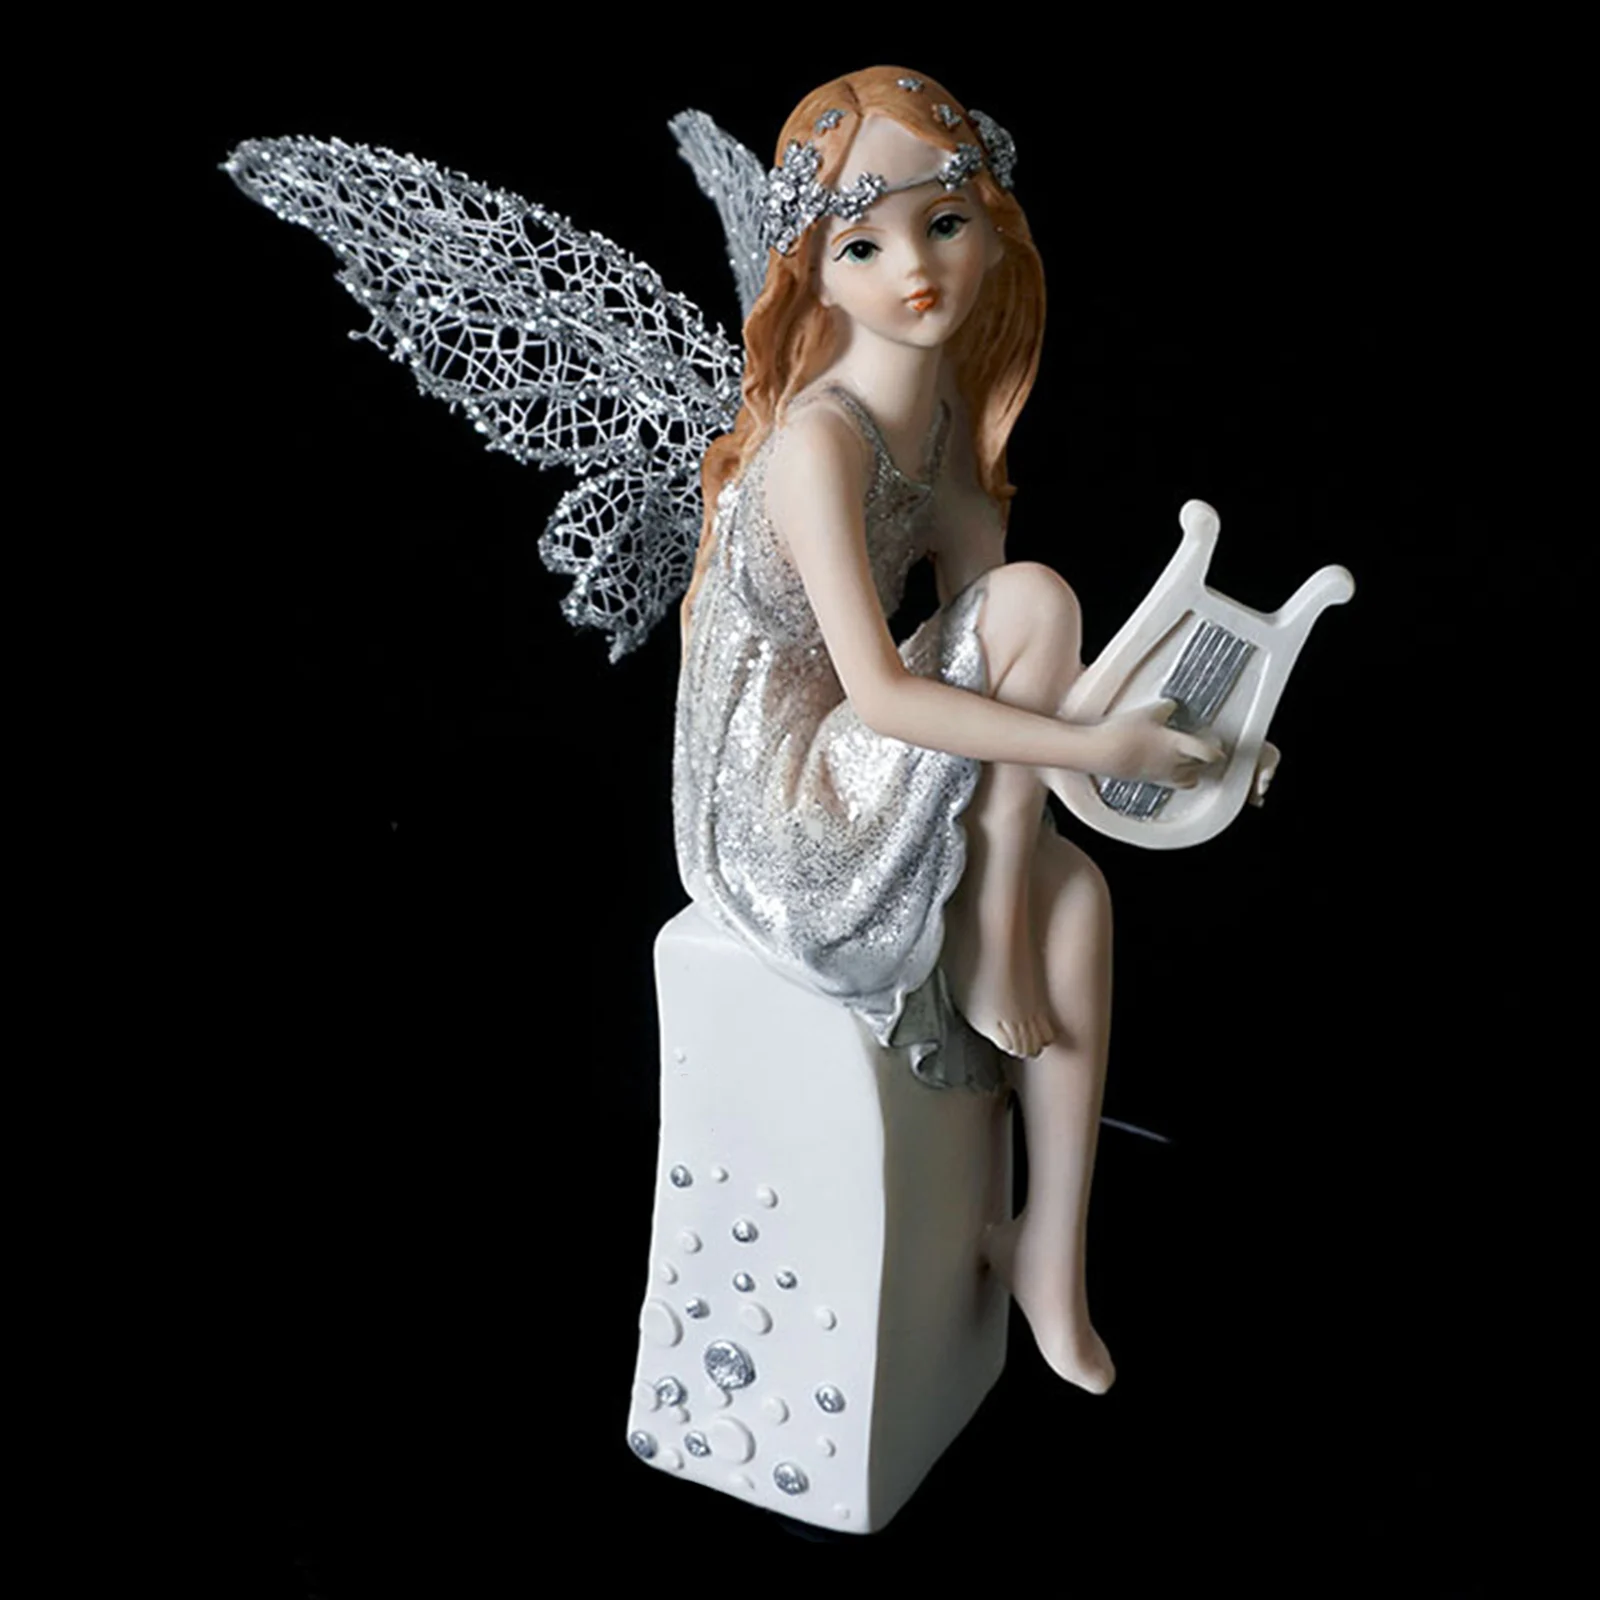 Music Fairy Figurine with Butterfly Fairy Garden Livingroom Office Desktop Wedding Party Ornament Home Decoration